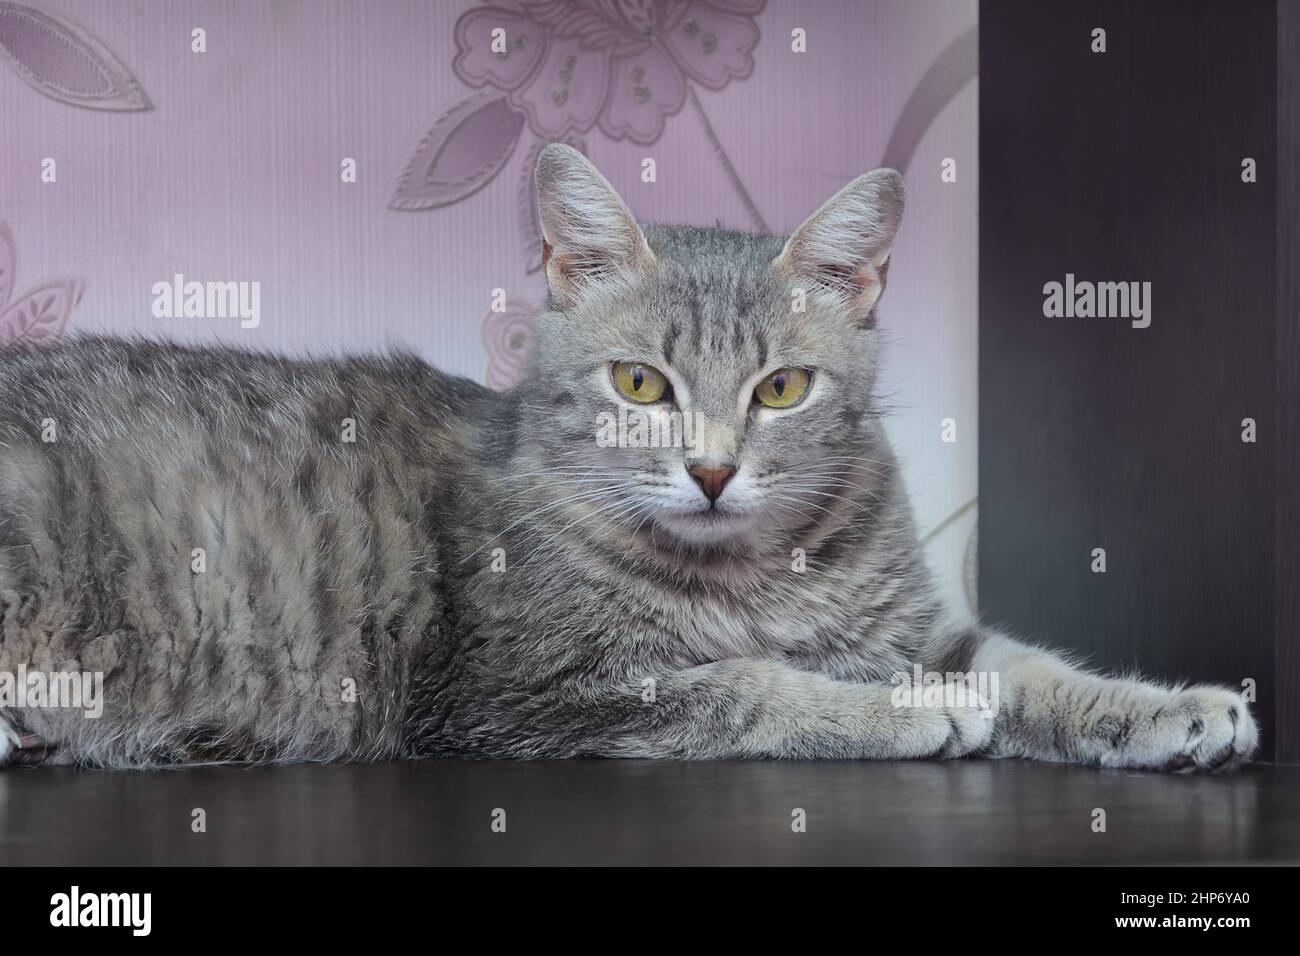 Gray tabby cat lies and looks at camera. Pets at home concept. Stock Photo